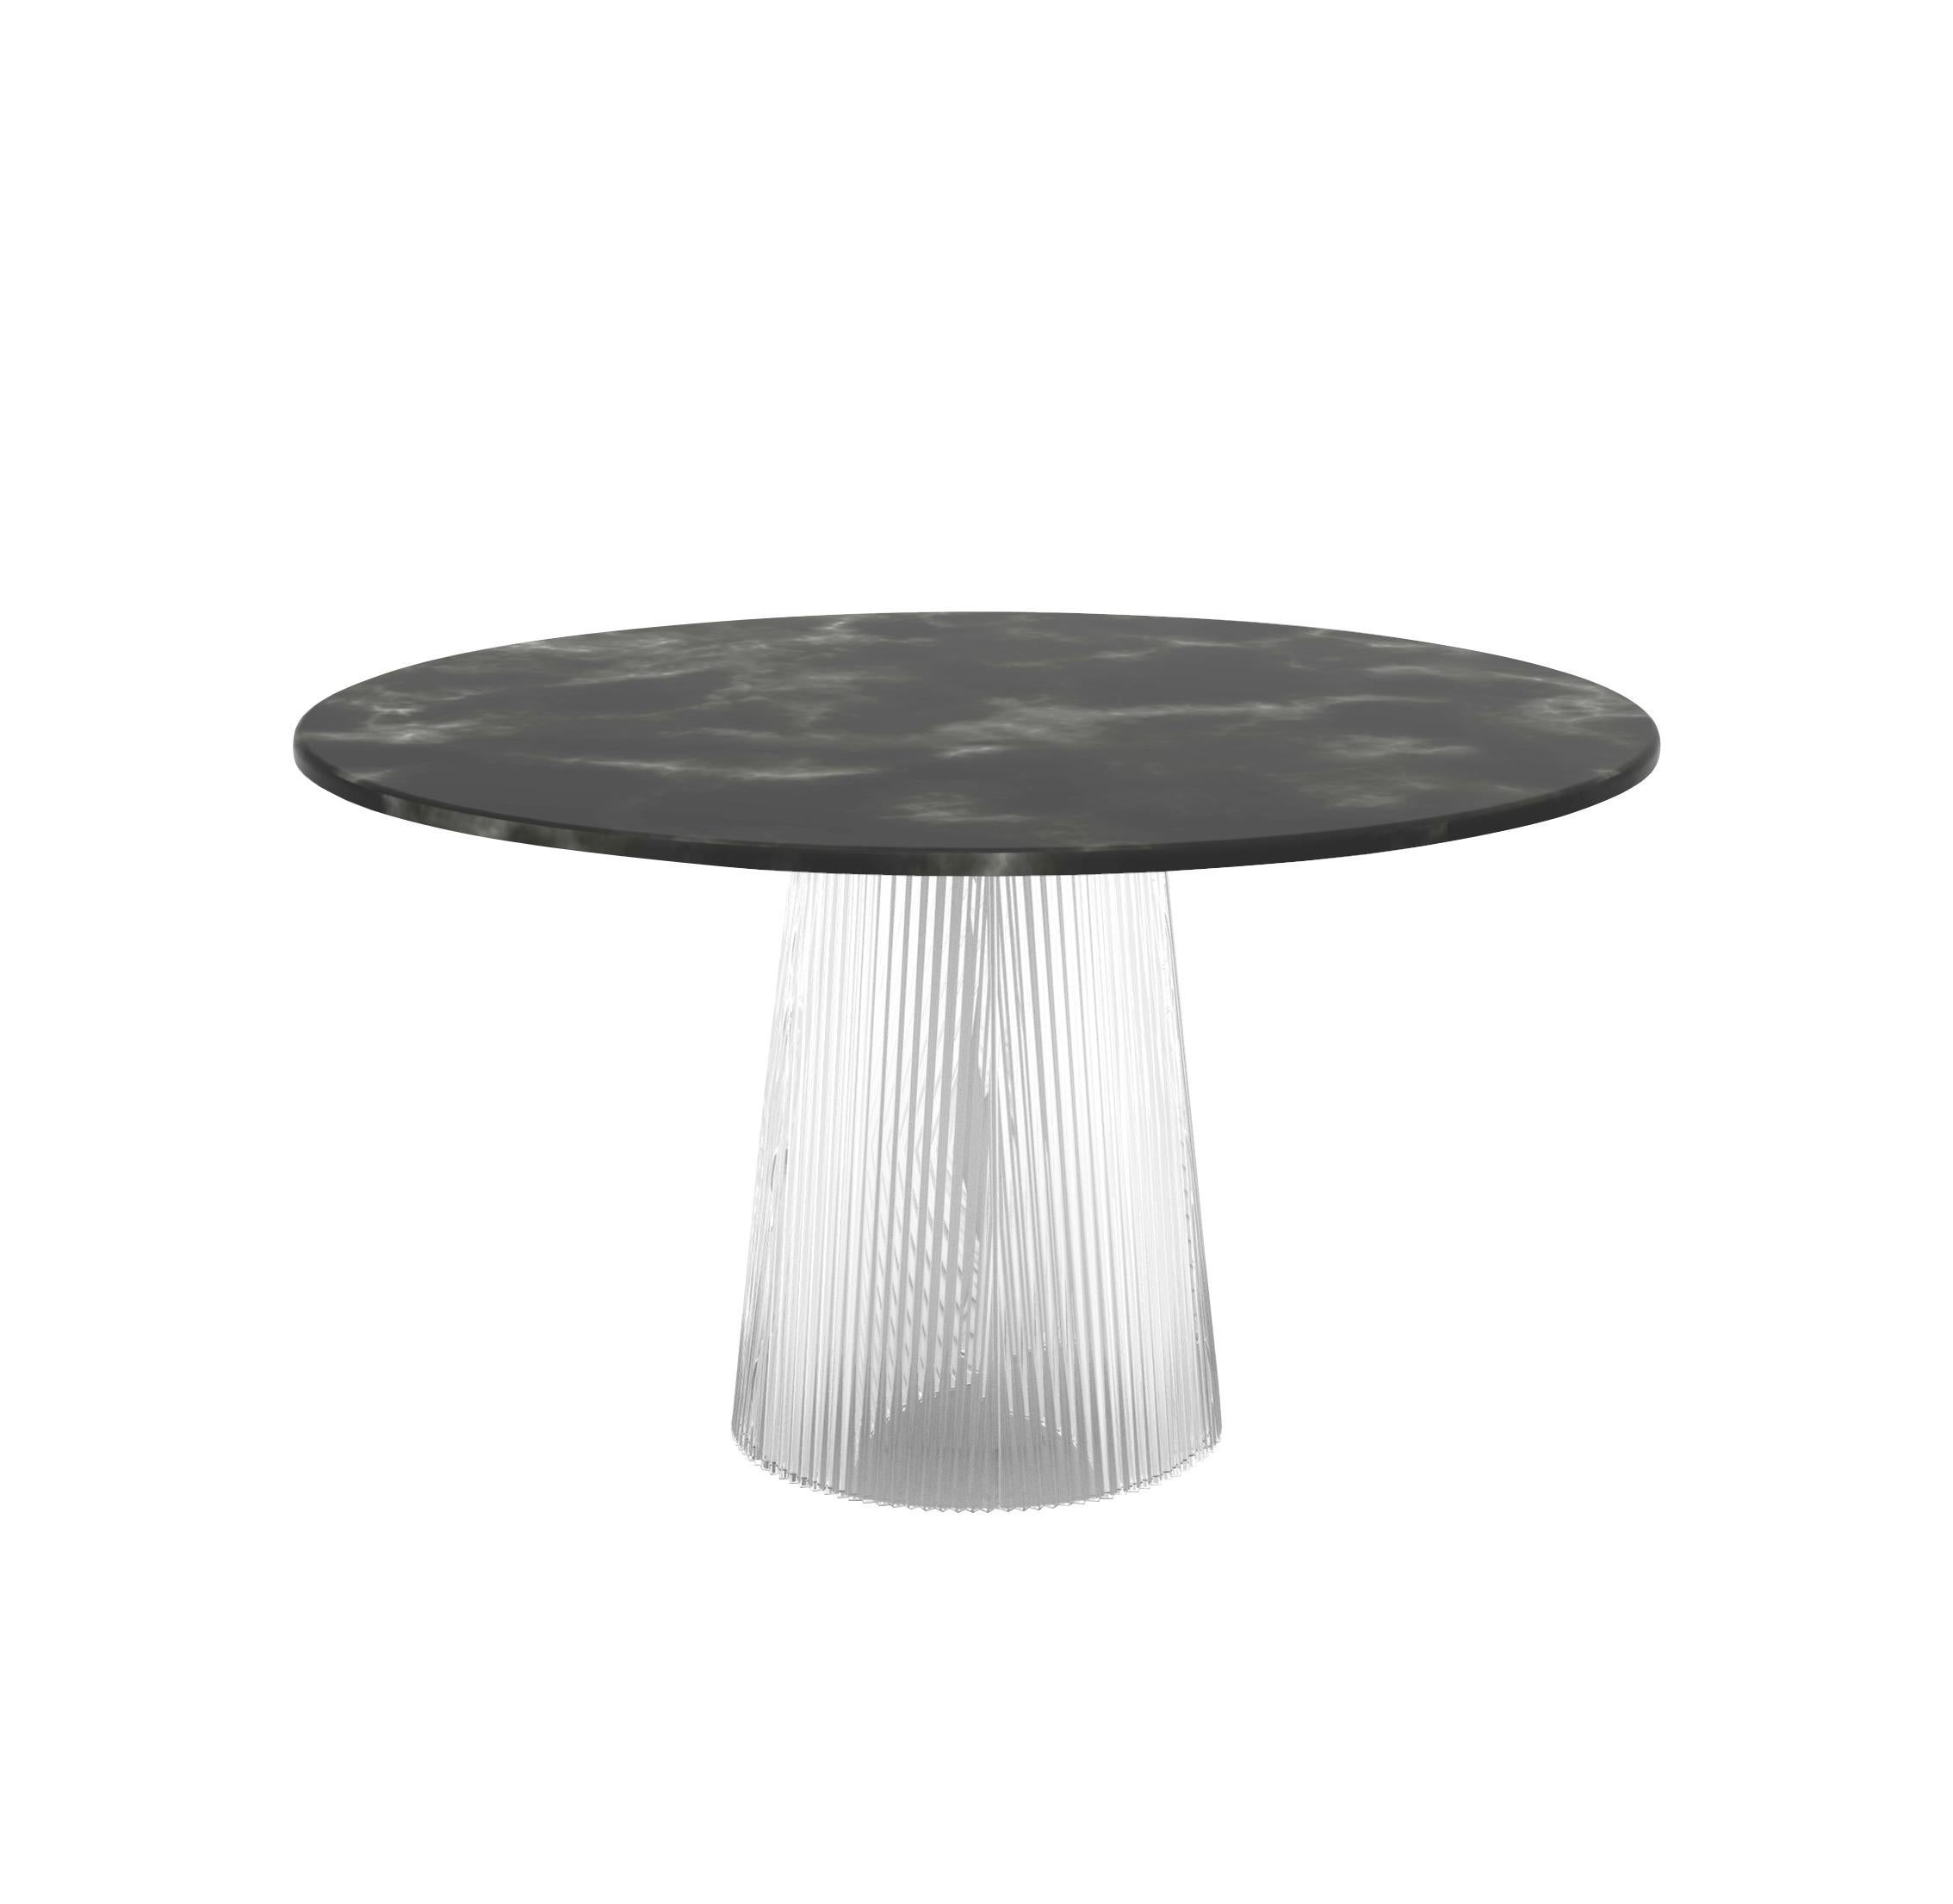 Bent dining table medium black transparent by Pulpo
Dimensions: D130 x H74 cm.
Materials: Casted glass, carrara, black nero or light green marble table top.

Also available in different finishes and dimensions. 

Two kinds of Material united